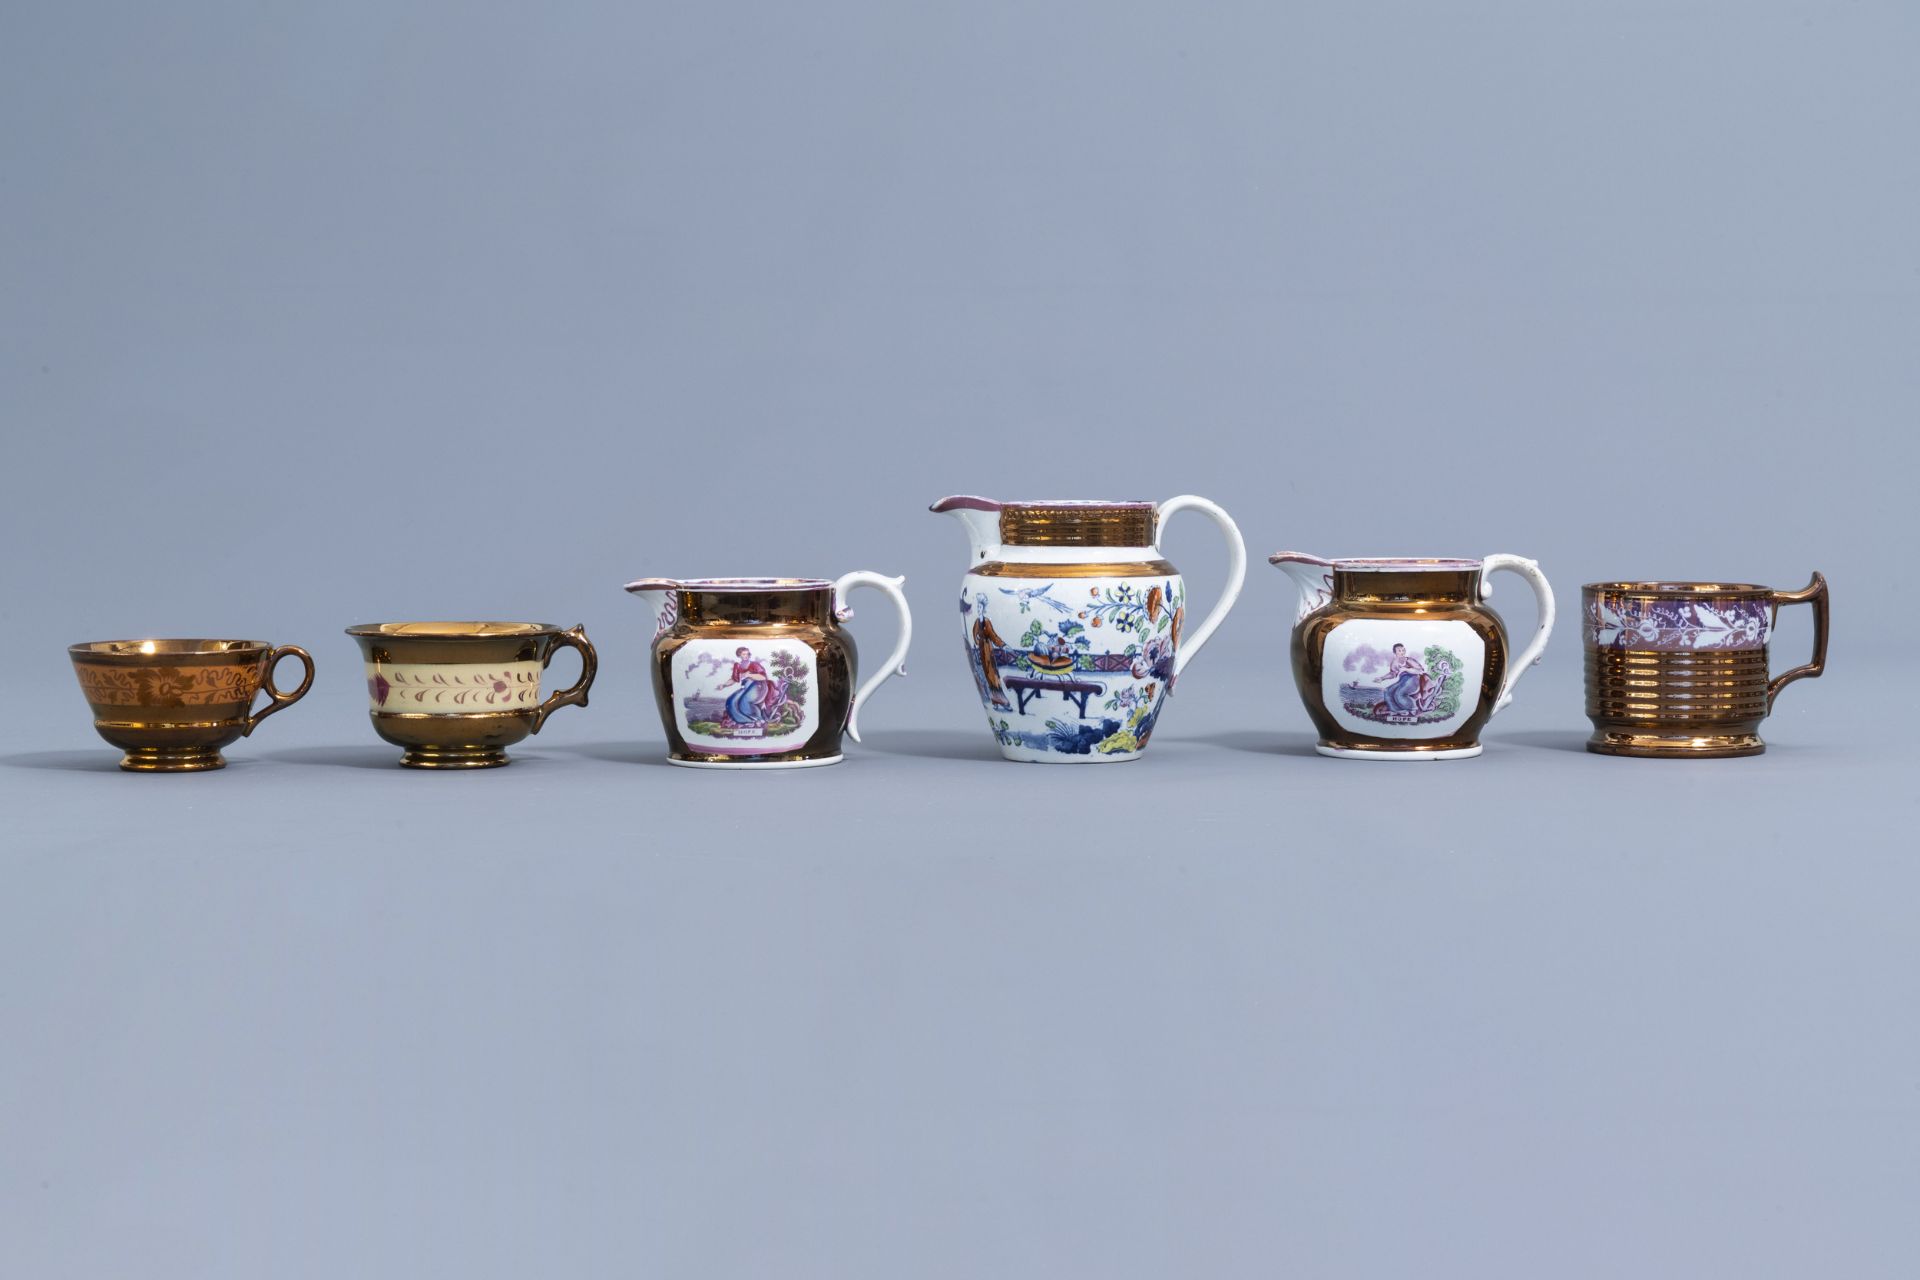 A varied collection of English lustreware items, 19th C. - Image 20 of 44